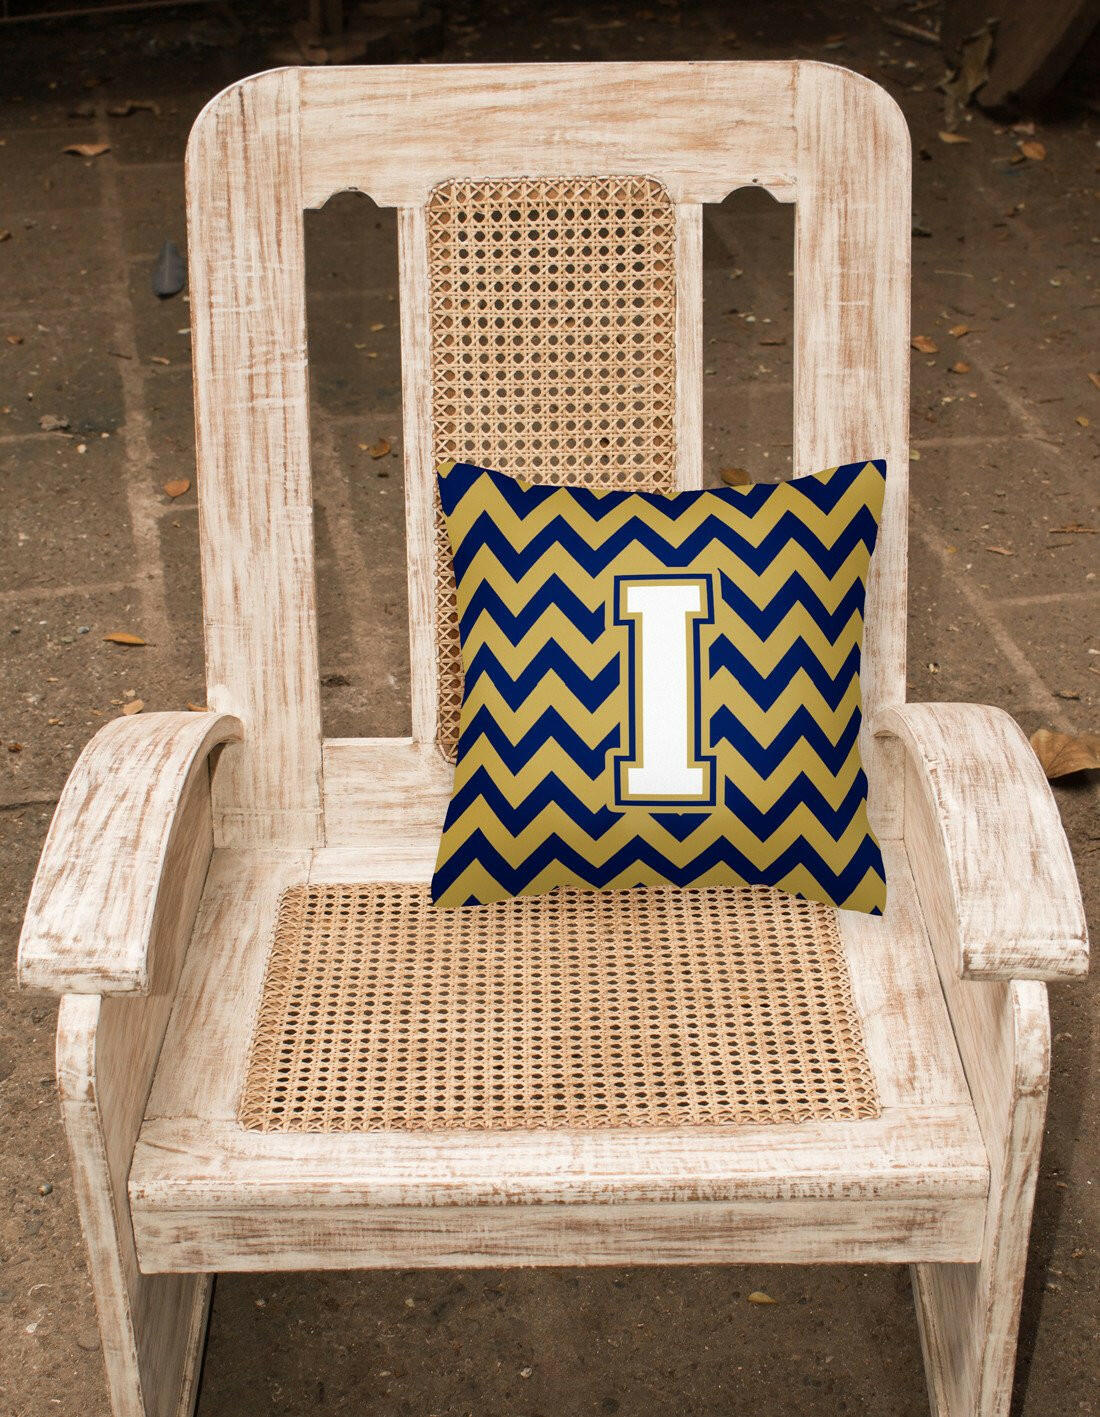 Letter I Chevron Navy Blue and Gold Fabric Decorative Pillow CJ1057-IPW1414 by Caroline's Treasures